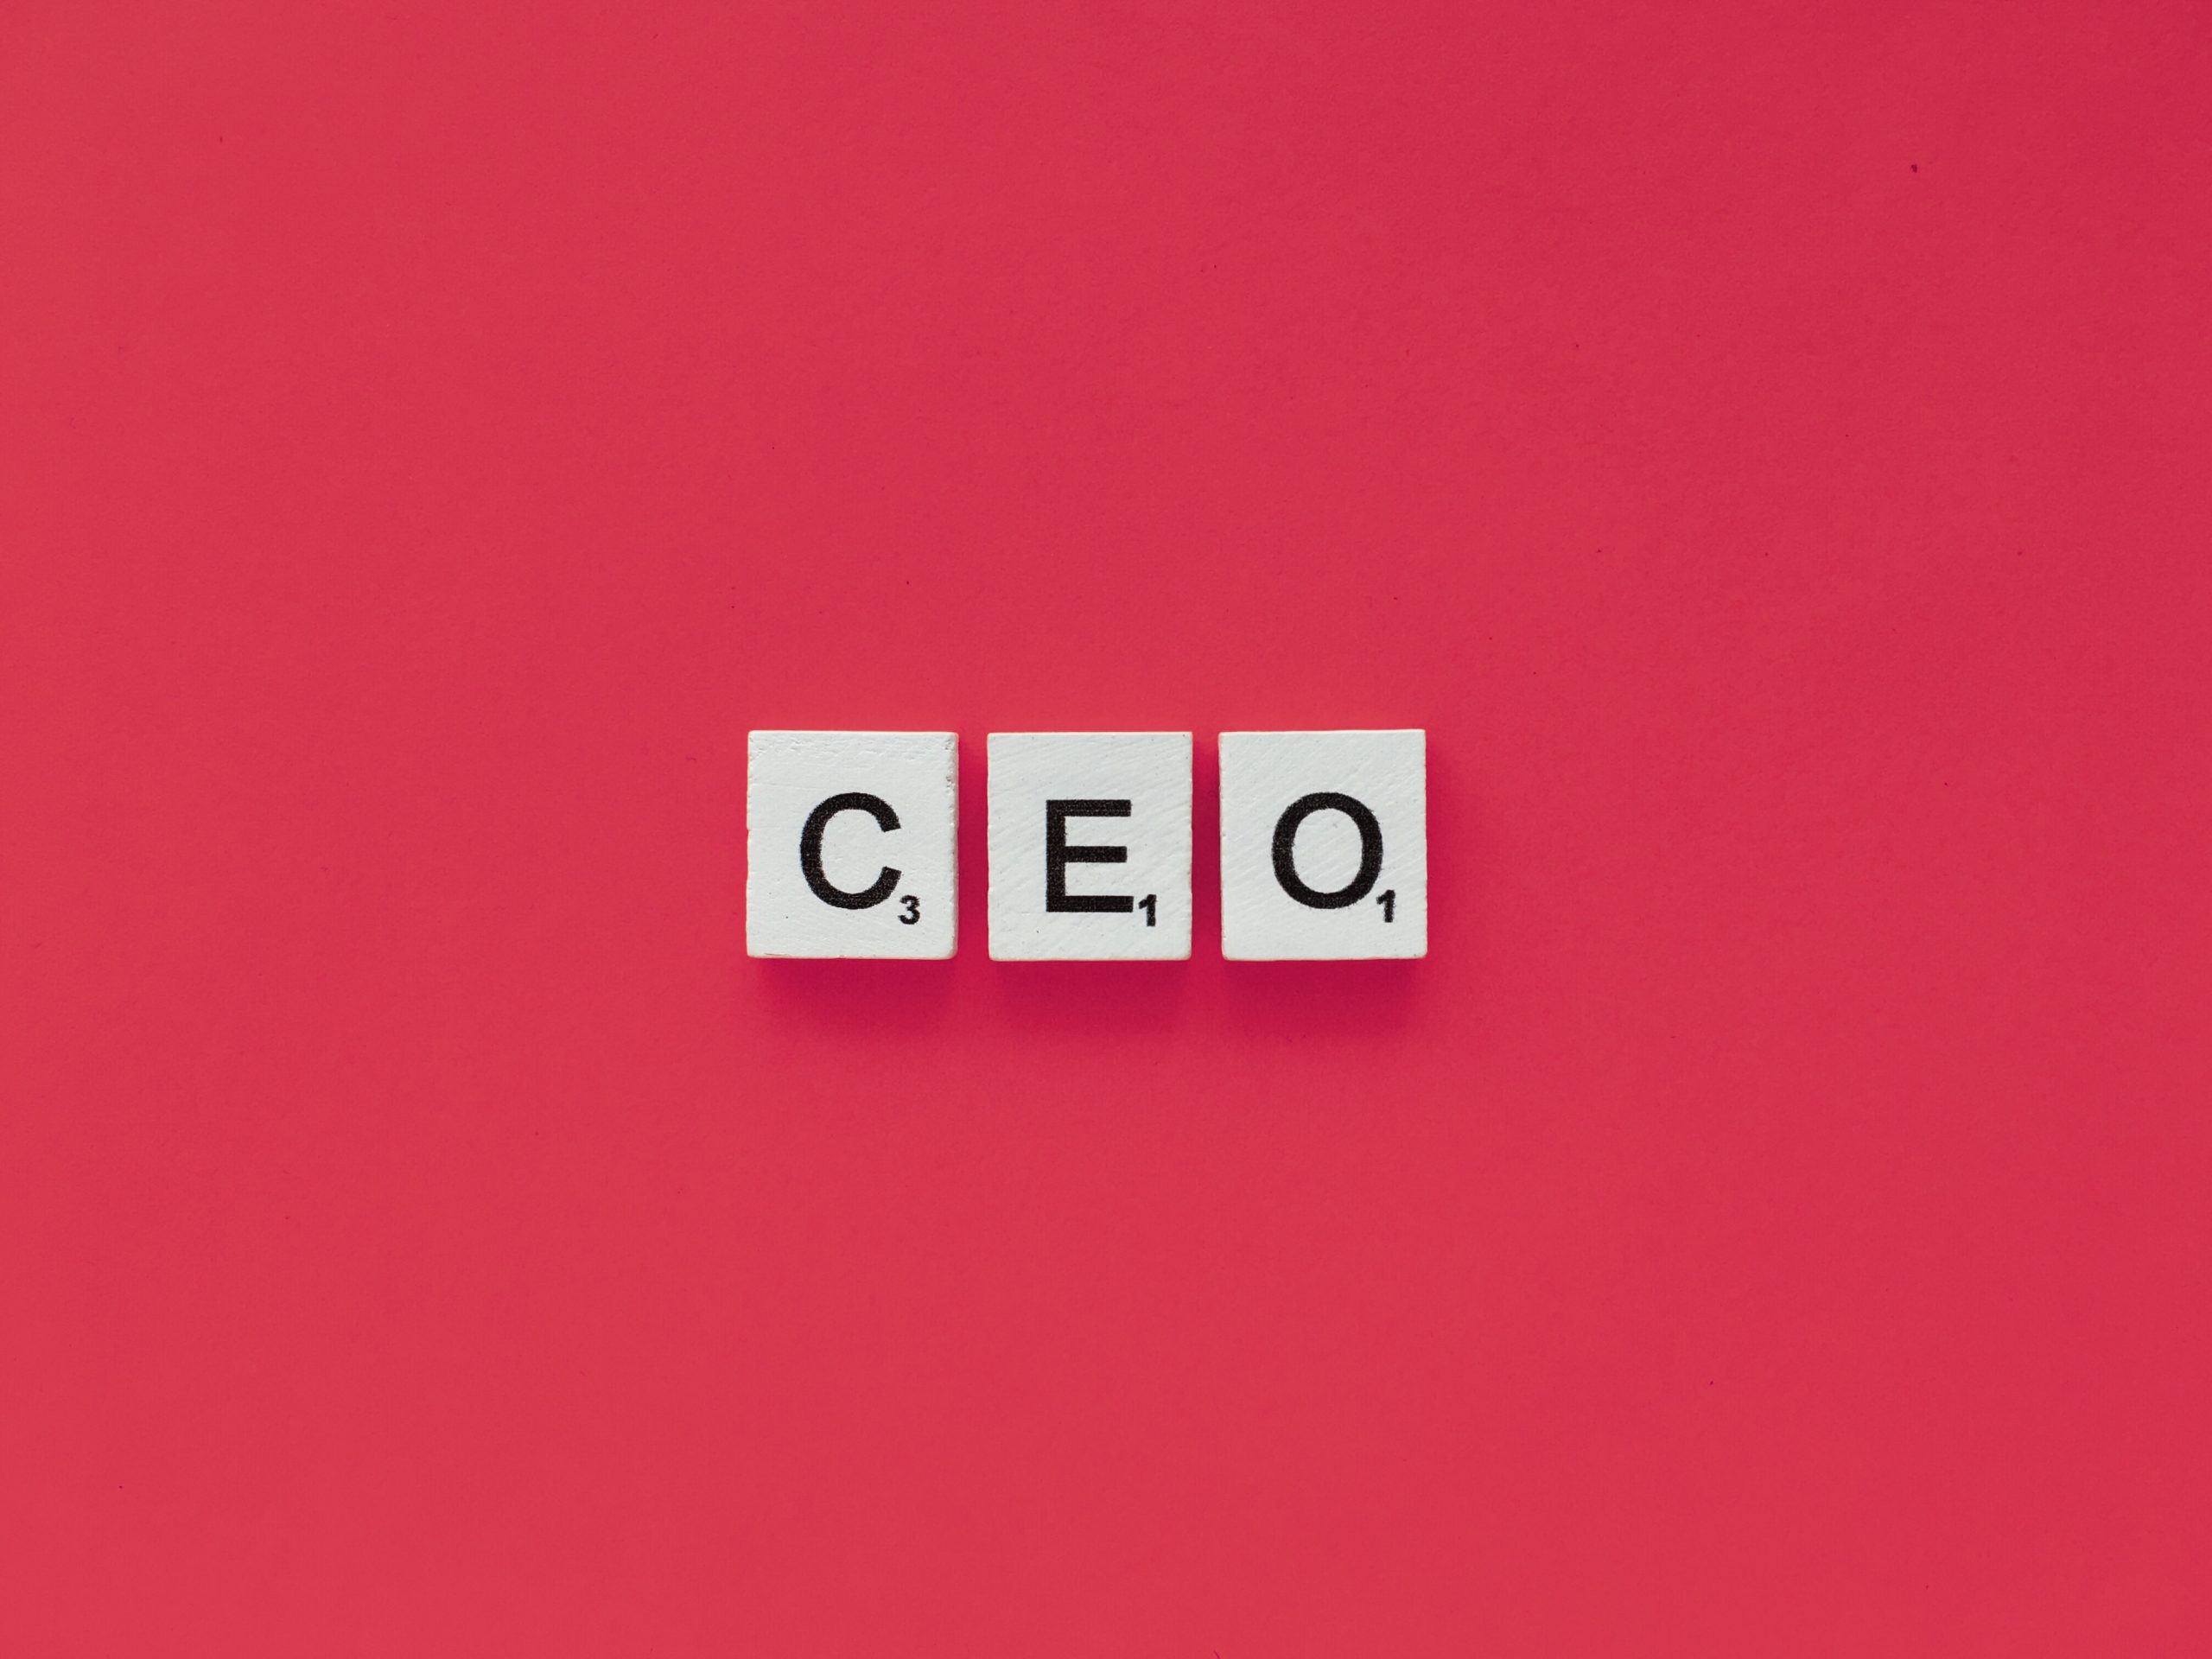 The Forever CEO – a Good Thing?